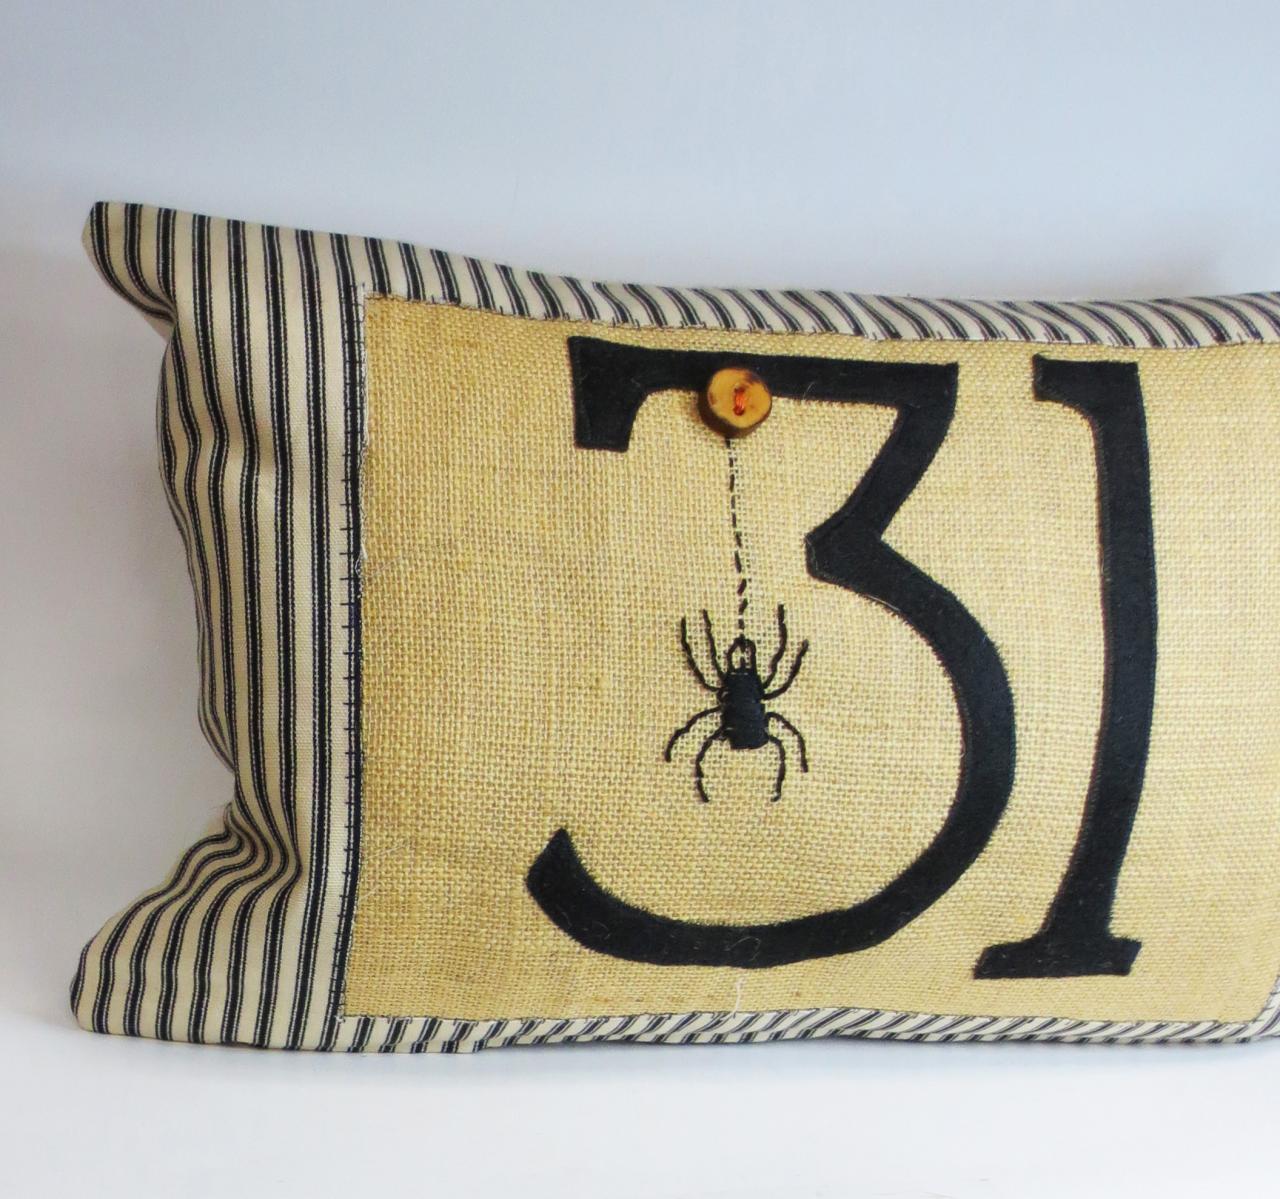 Decorative Kidney Pillow Cushion Cover With Spider And Halloween Inspired